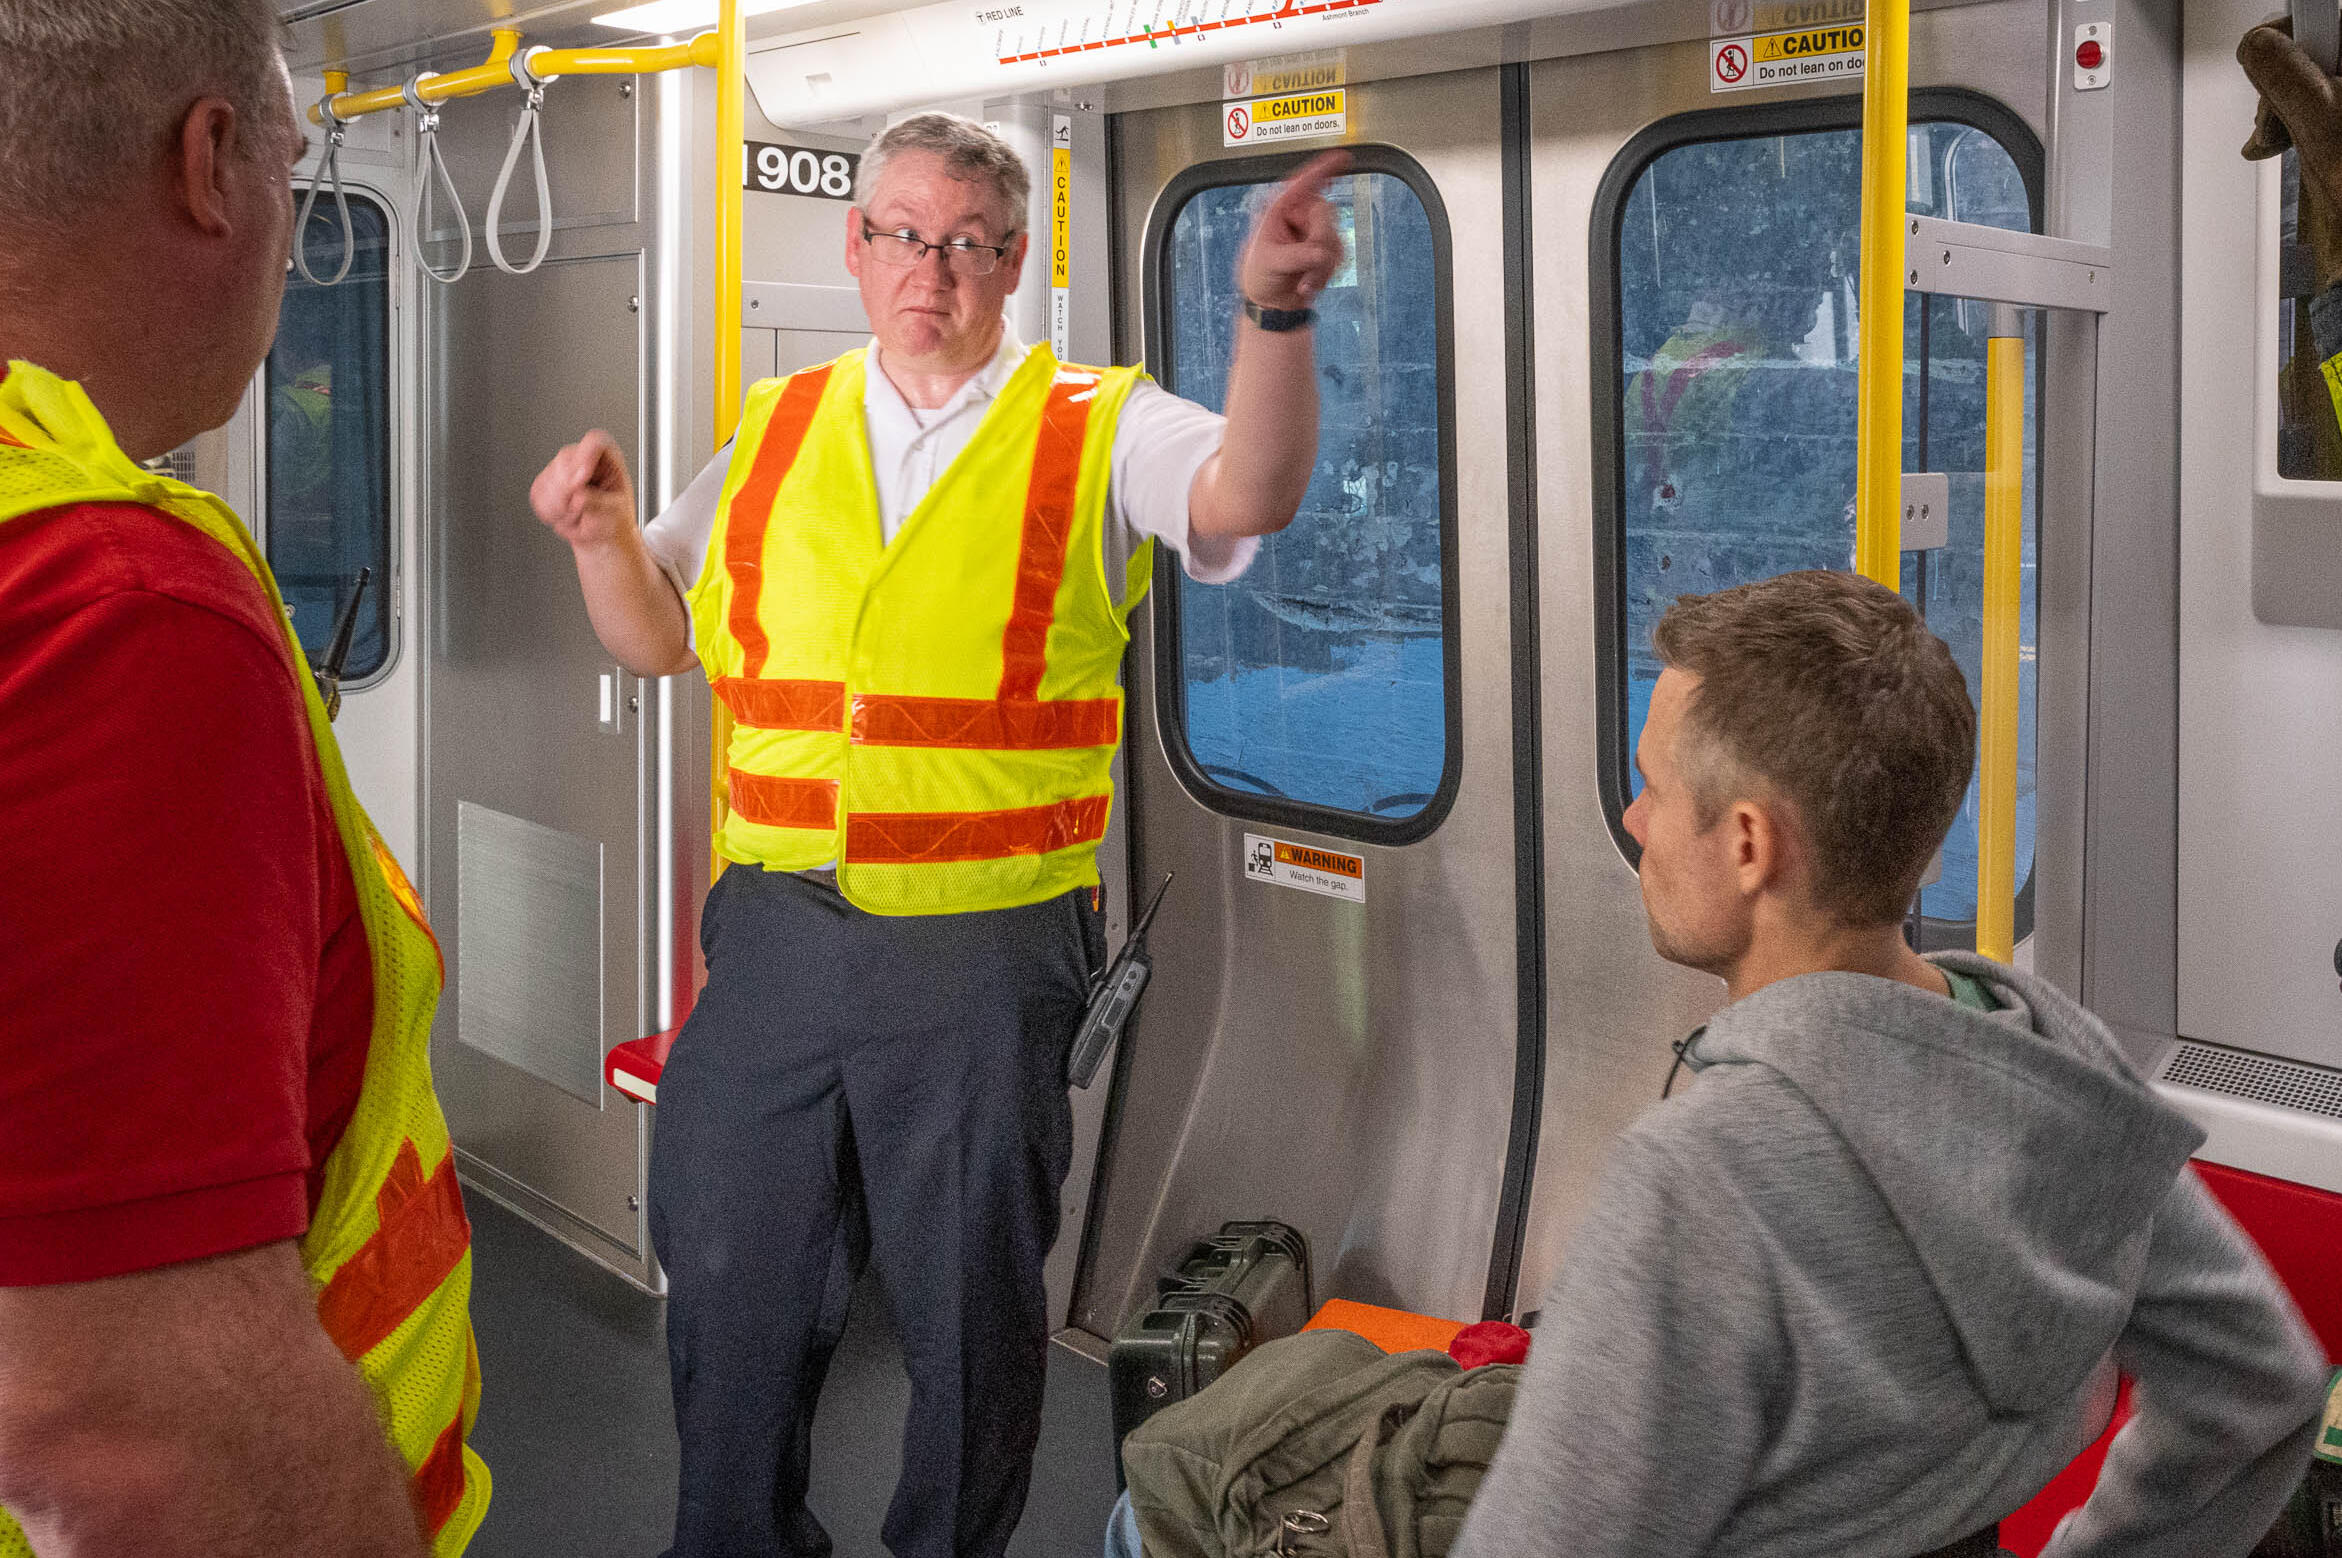 An MBTA official in a Red Line subway car is wearing a high visibility safety vest while he conducts an emergency evacuation drill. He points to the opposite end of the subway car while two trainees watch and listen to him.